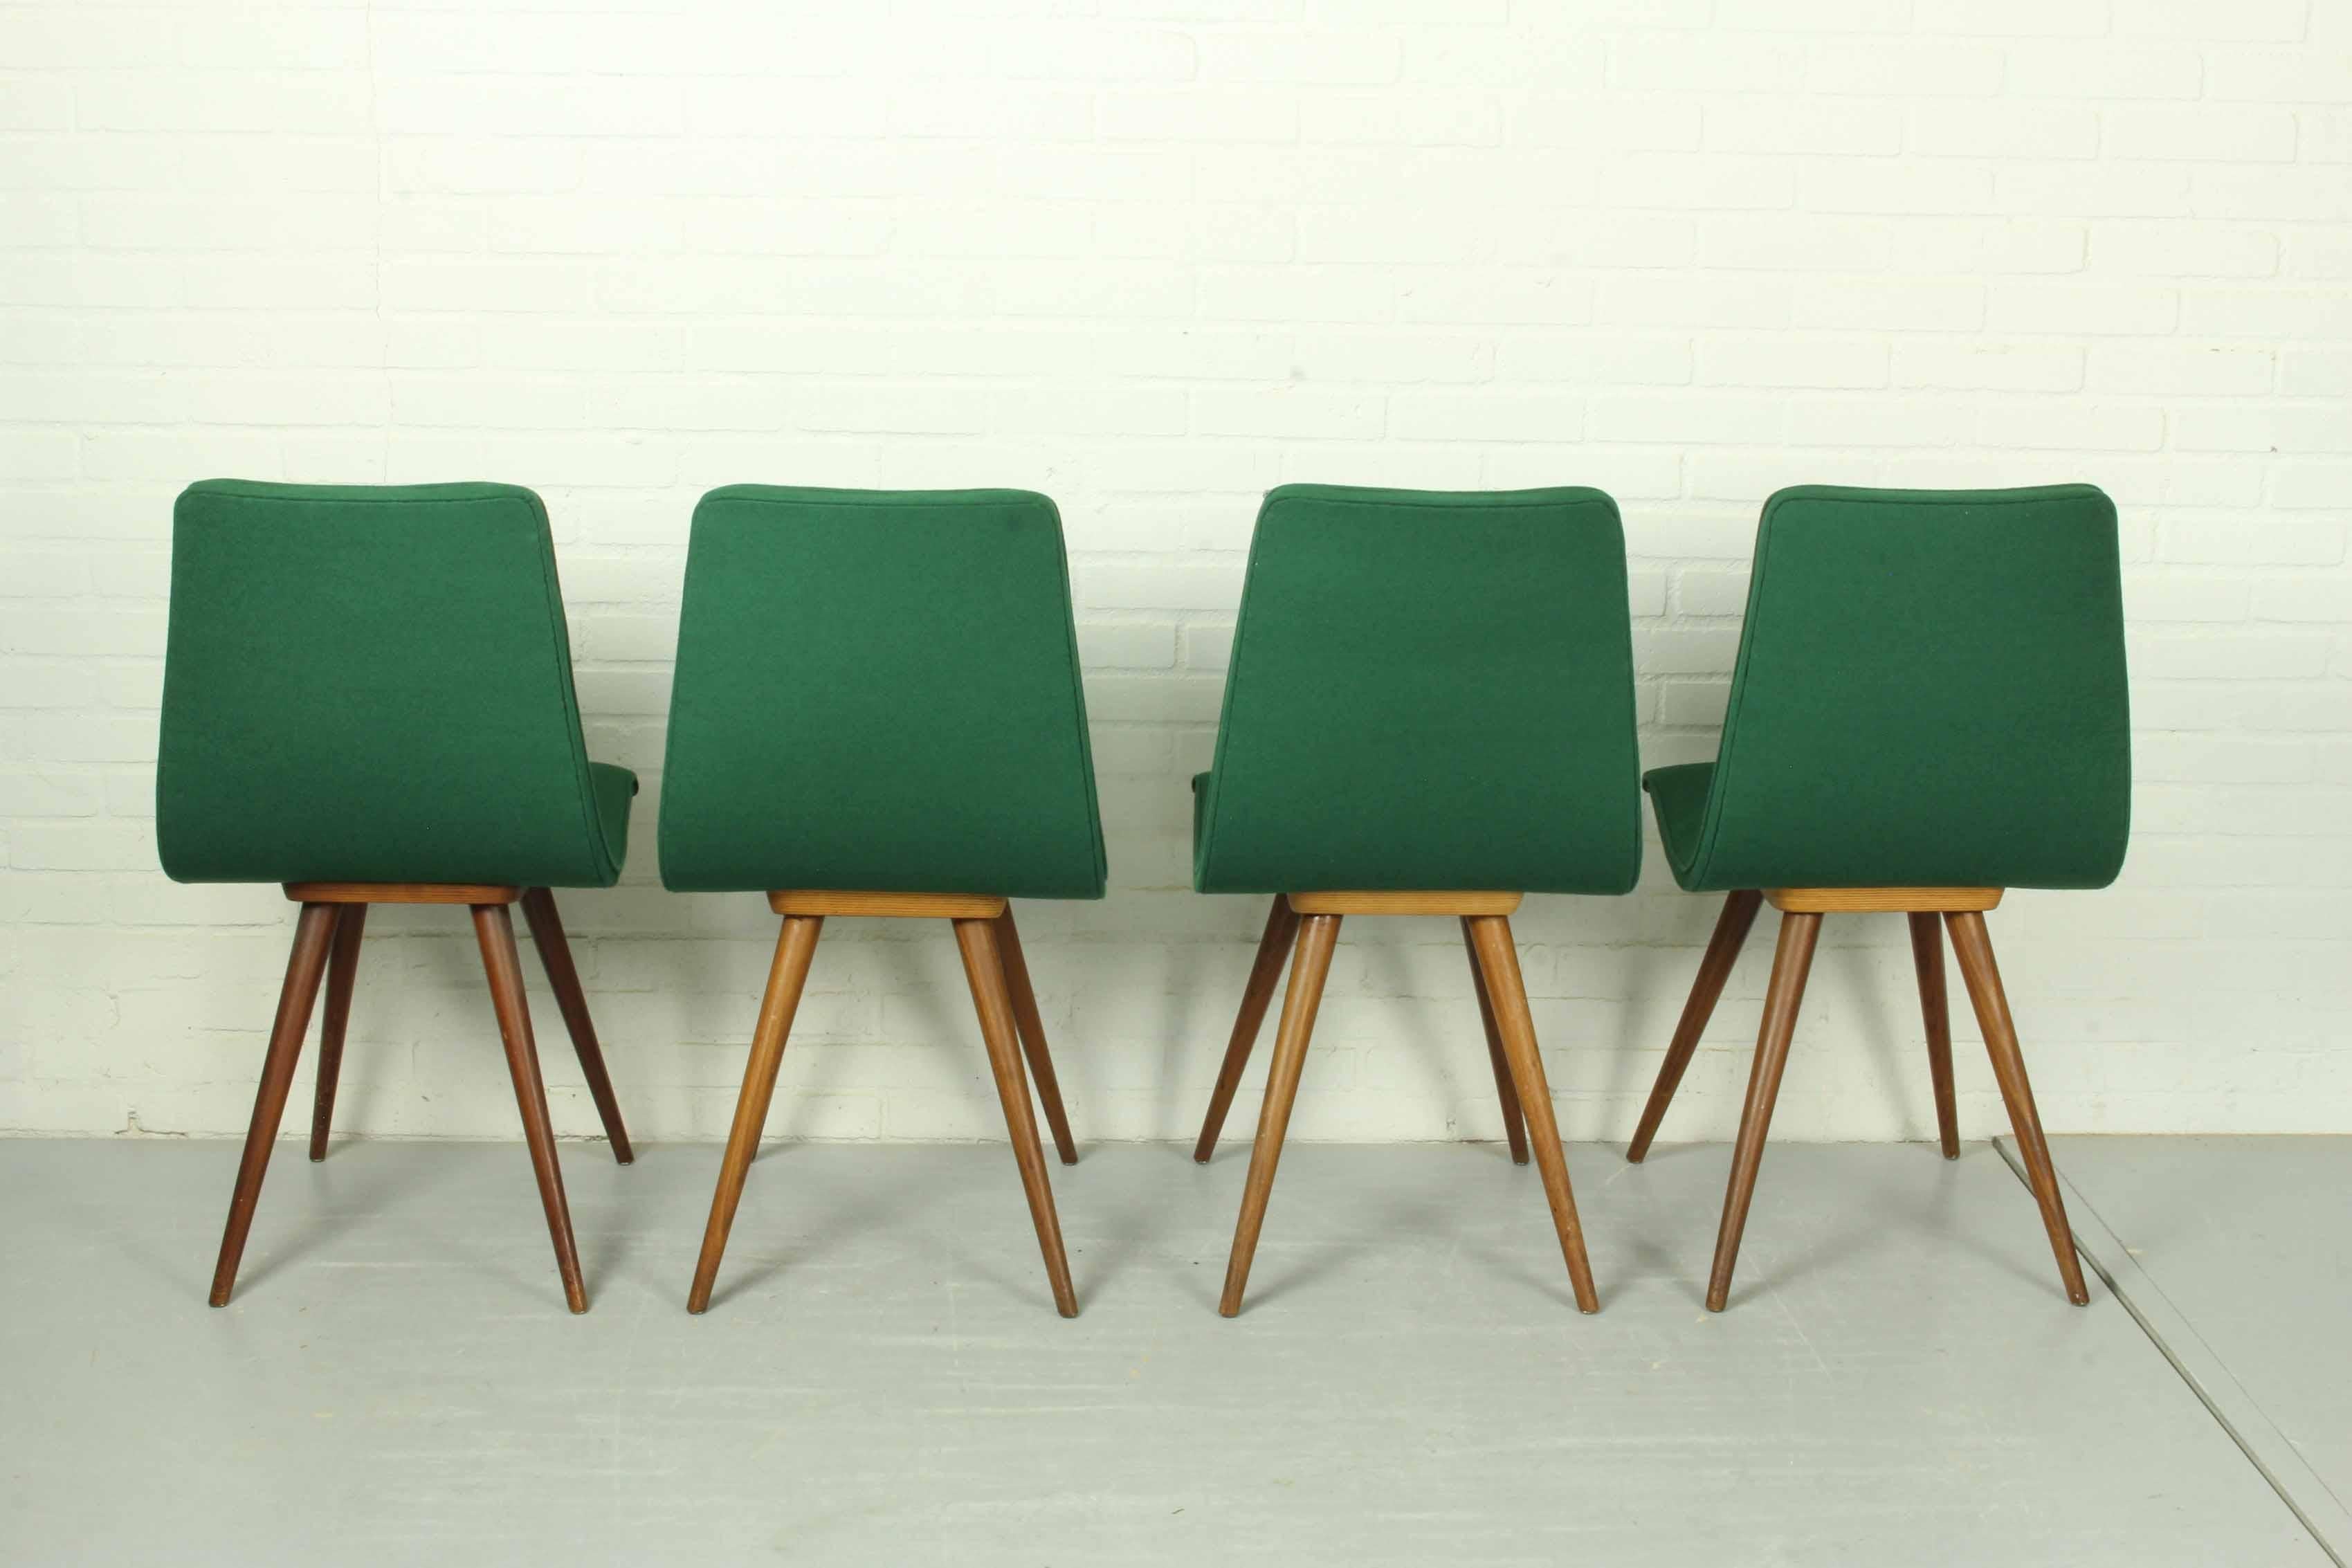 Set of 4 Teak Dining Chairs by Van Os, 1950s For Sale 5